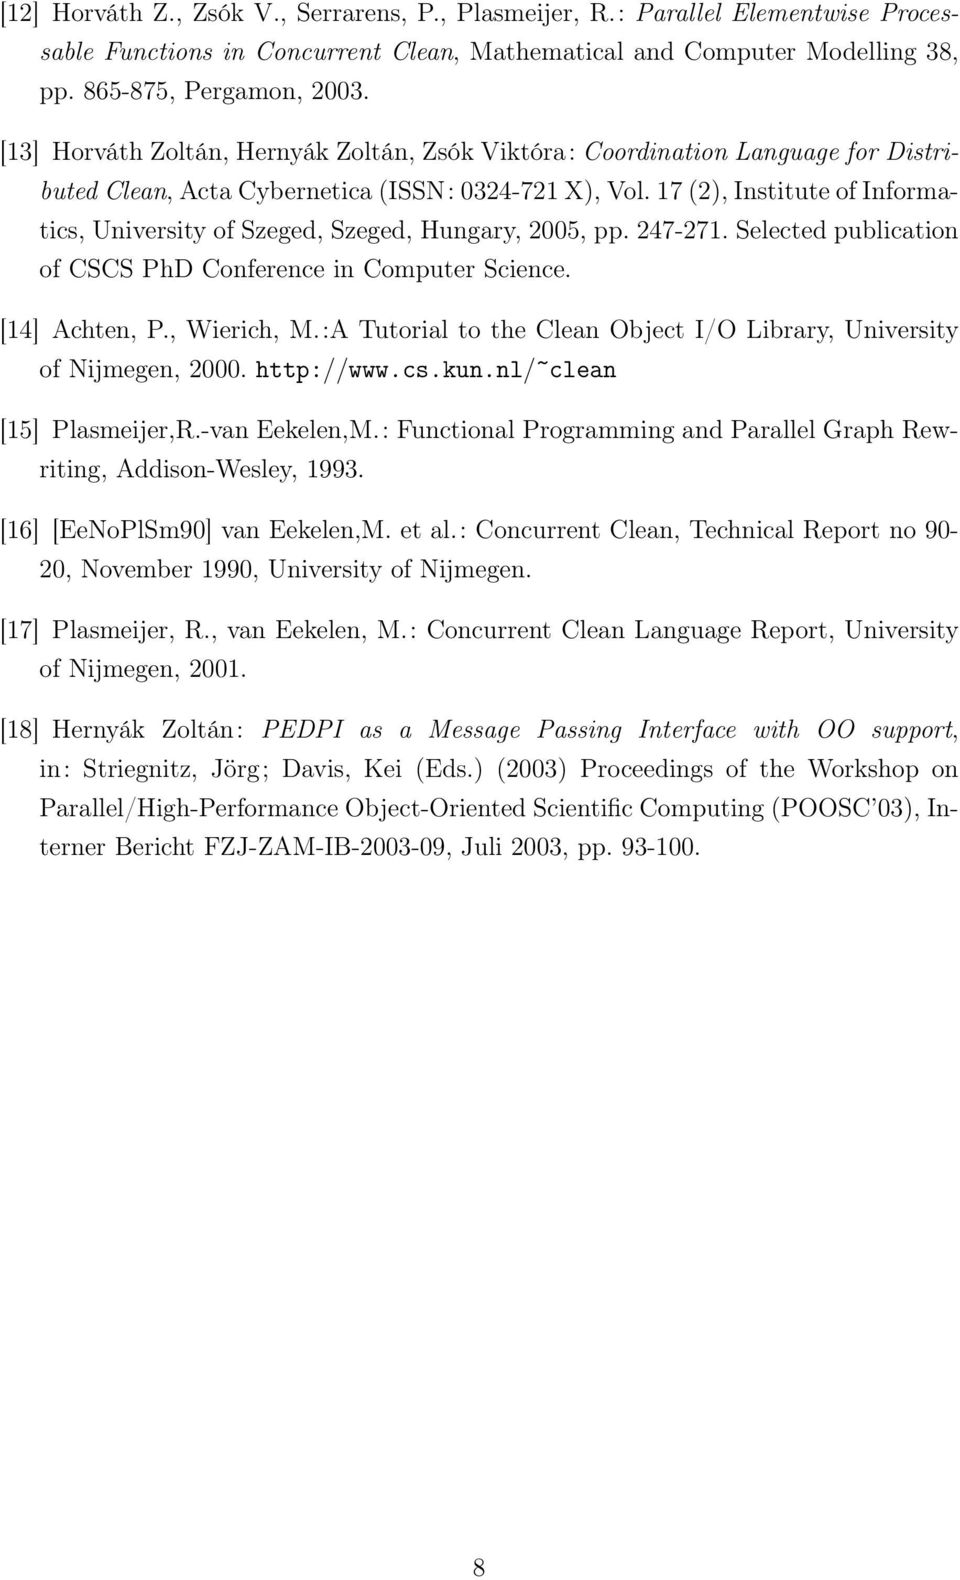 17 (2), Institute of Informatics, University of Szeged, Szeged, Hungary, 2005, pp. 247-271. Selected publication of CSCS PhD Conference in Computer Science. [14] Achten, P., Wierich, M.